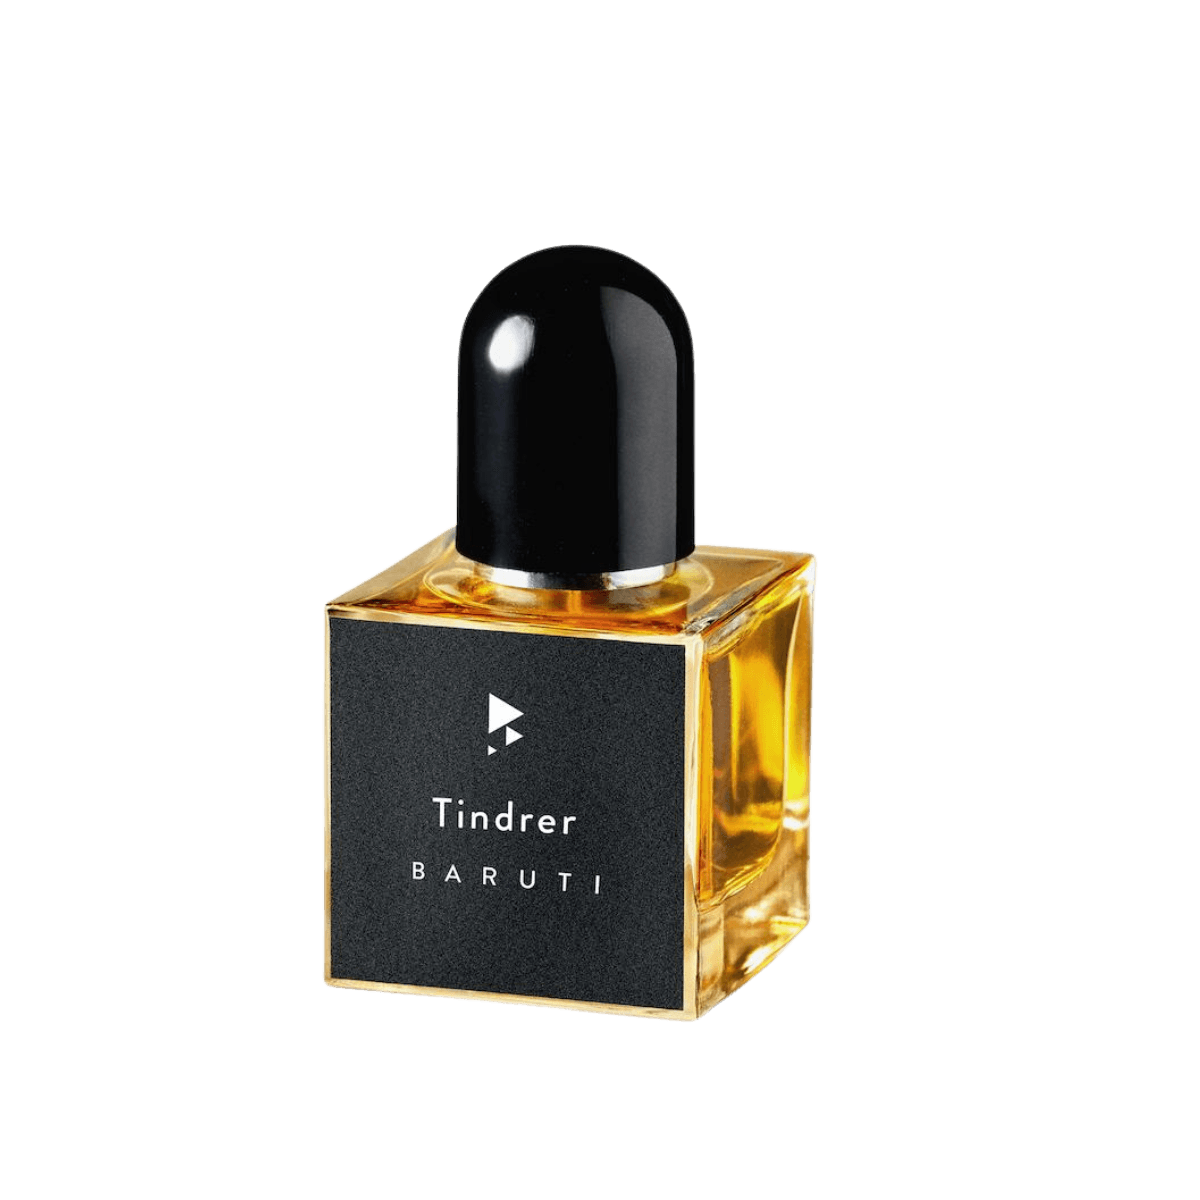 Image of the perfume Tindrer by the brand Baruti